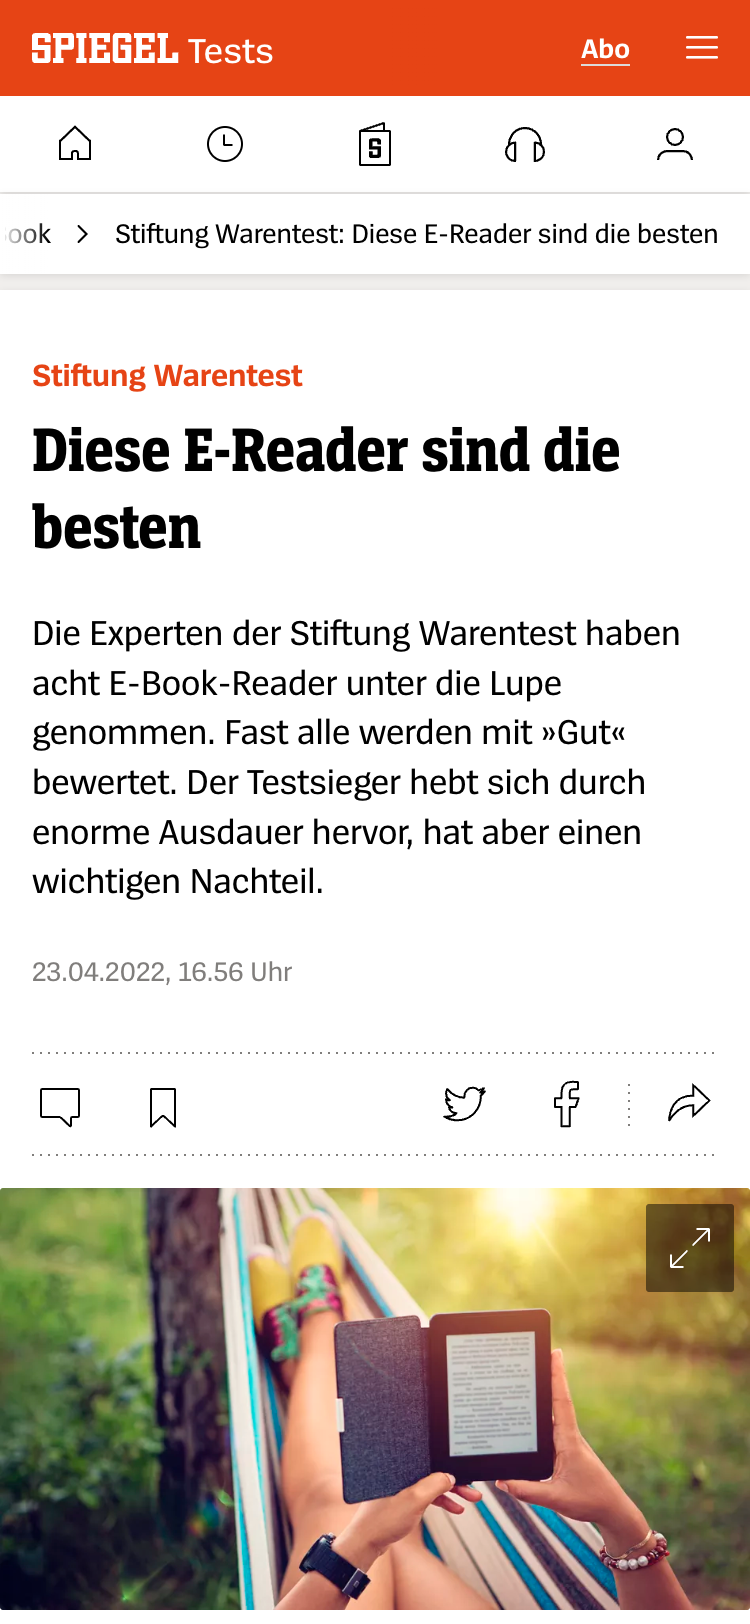 Mobile screenshot of an article on the Der Spiegel website. The header contains the Spiegel logo and a menu button. There is also a row of icons for navigation, including a house icon for the home page. The article title is followed a summary paragraph, a row of social media icons, and a full-width image.